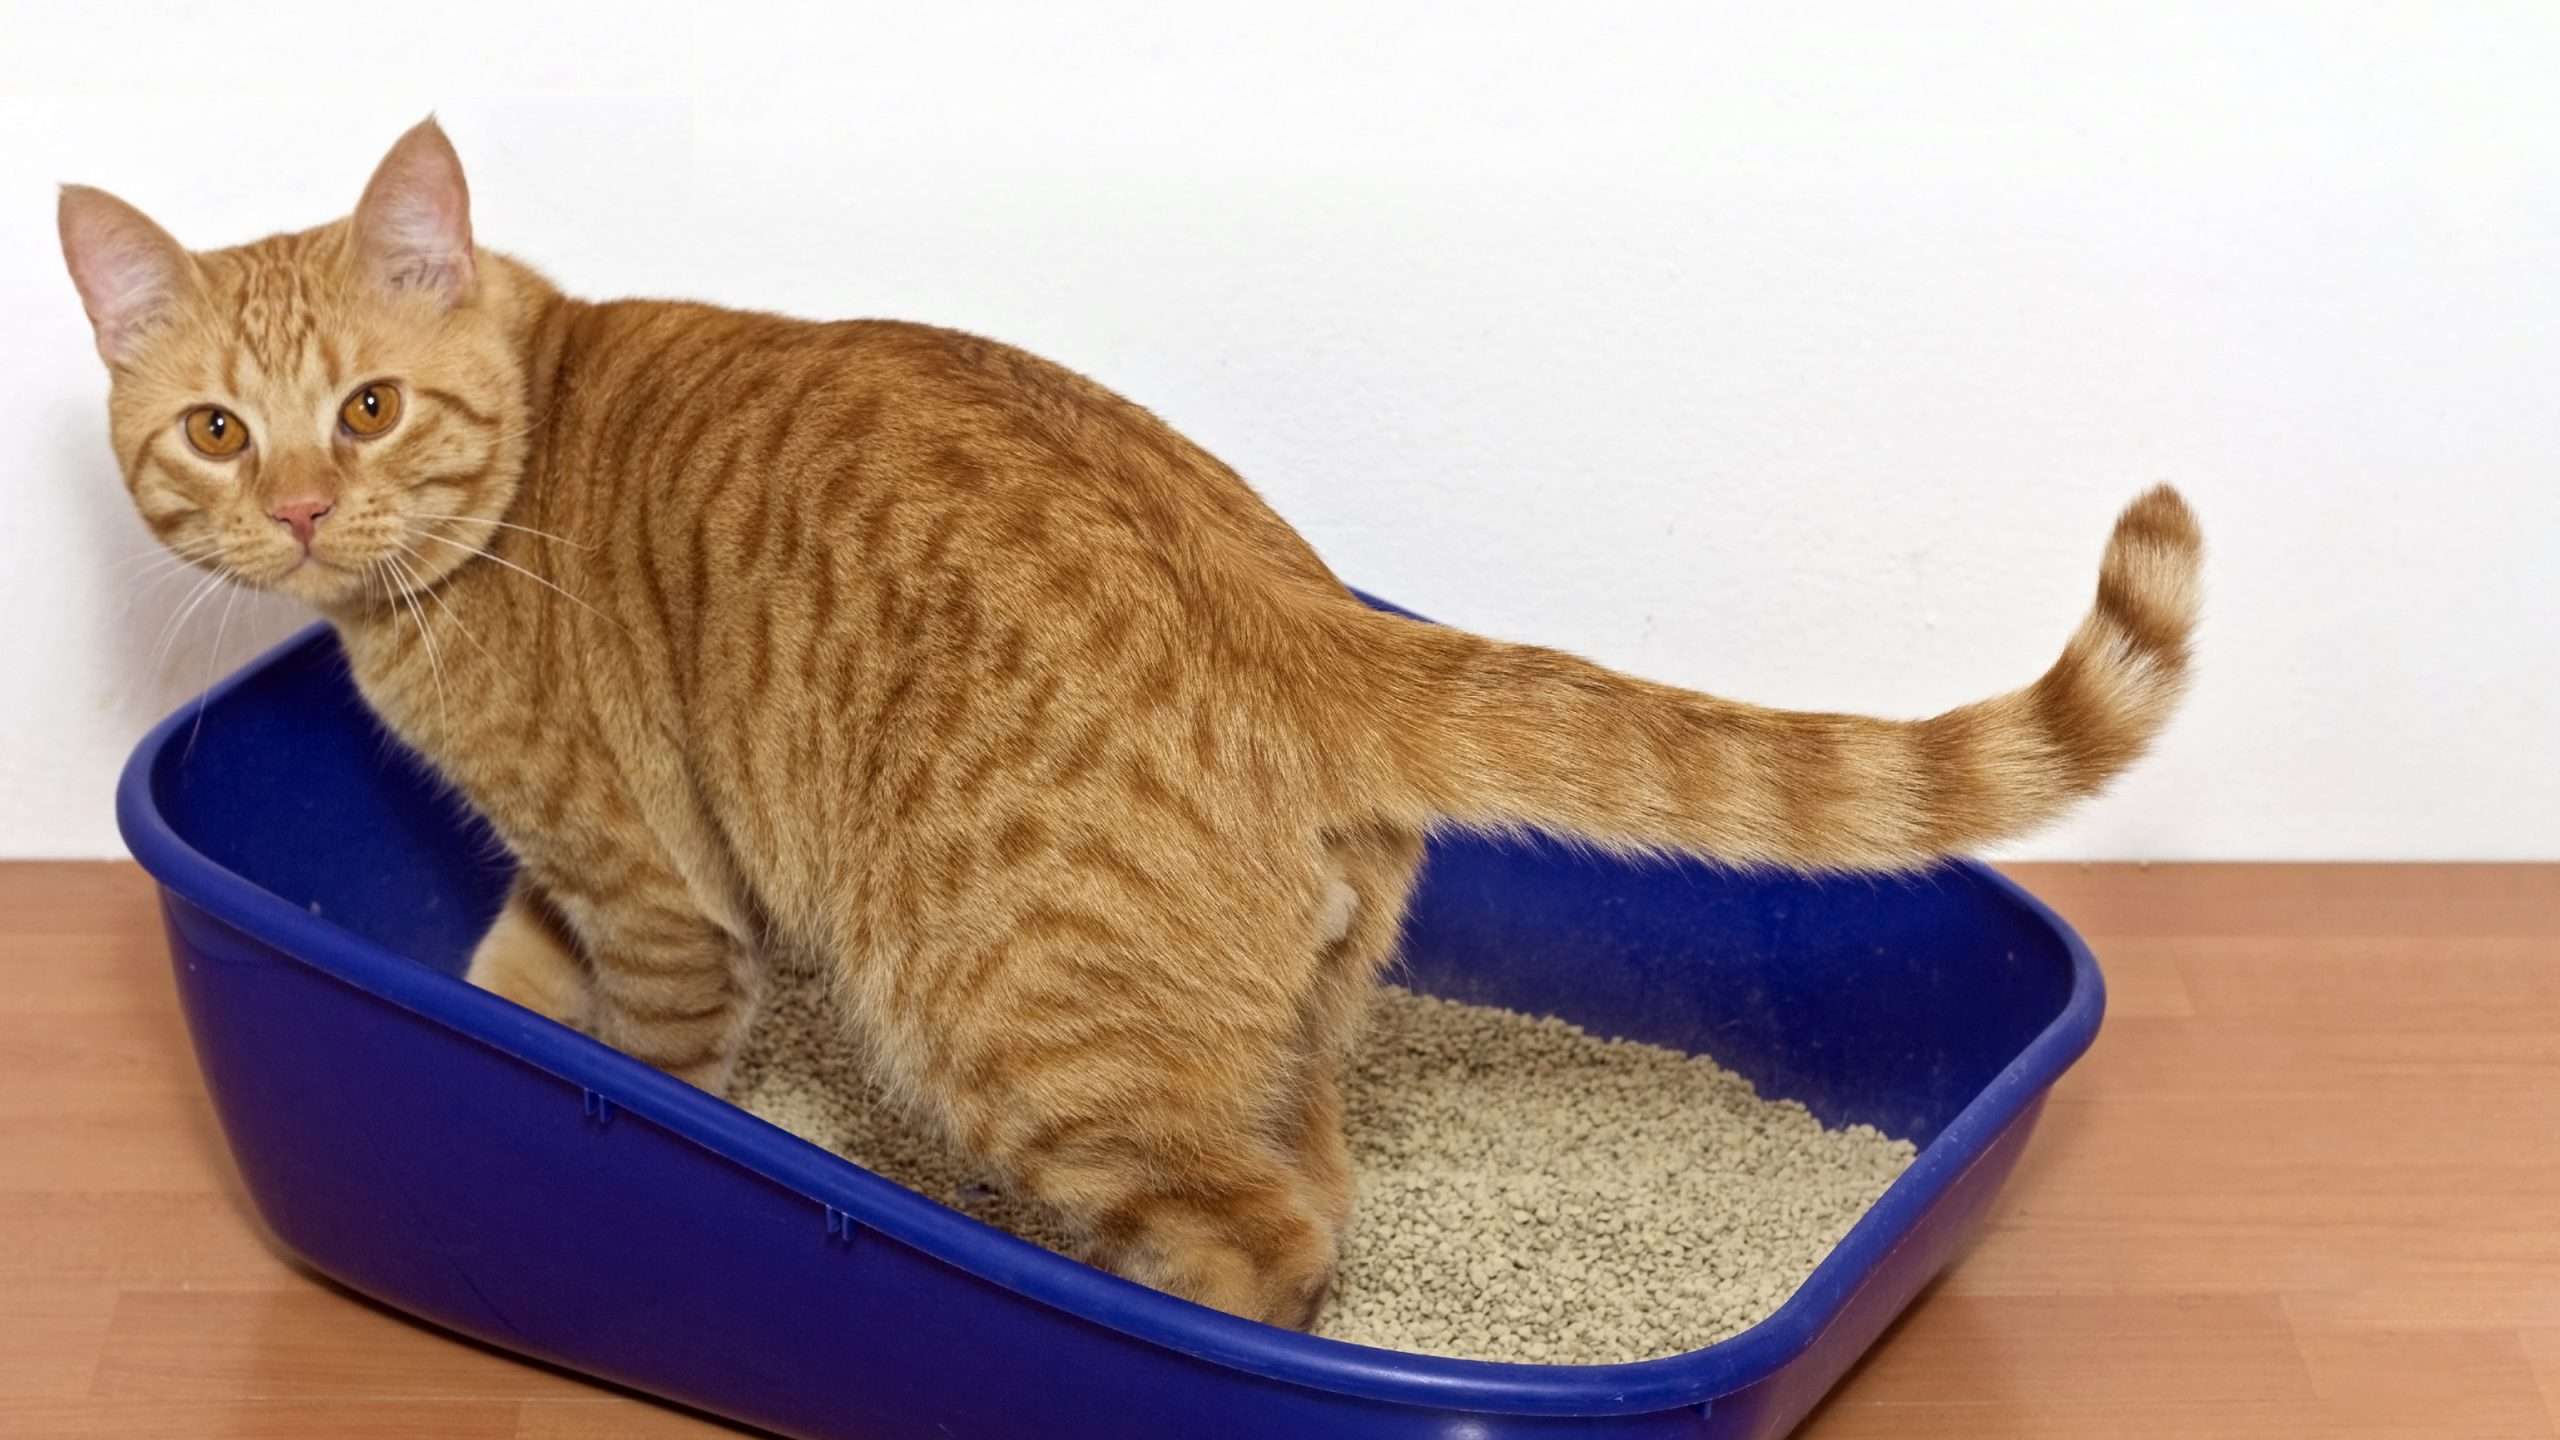 Train Your Kitten To Use The Litter Box